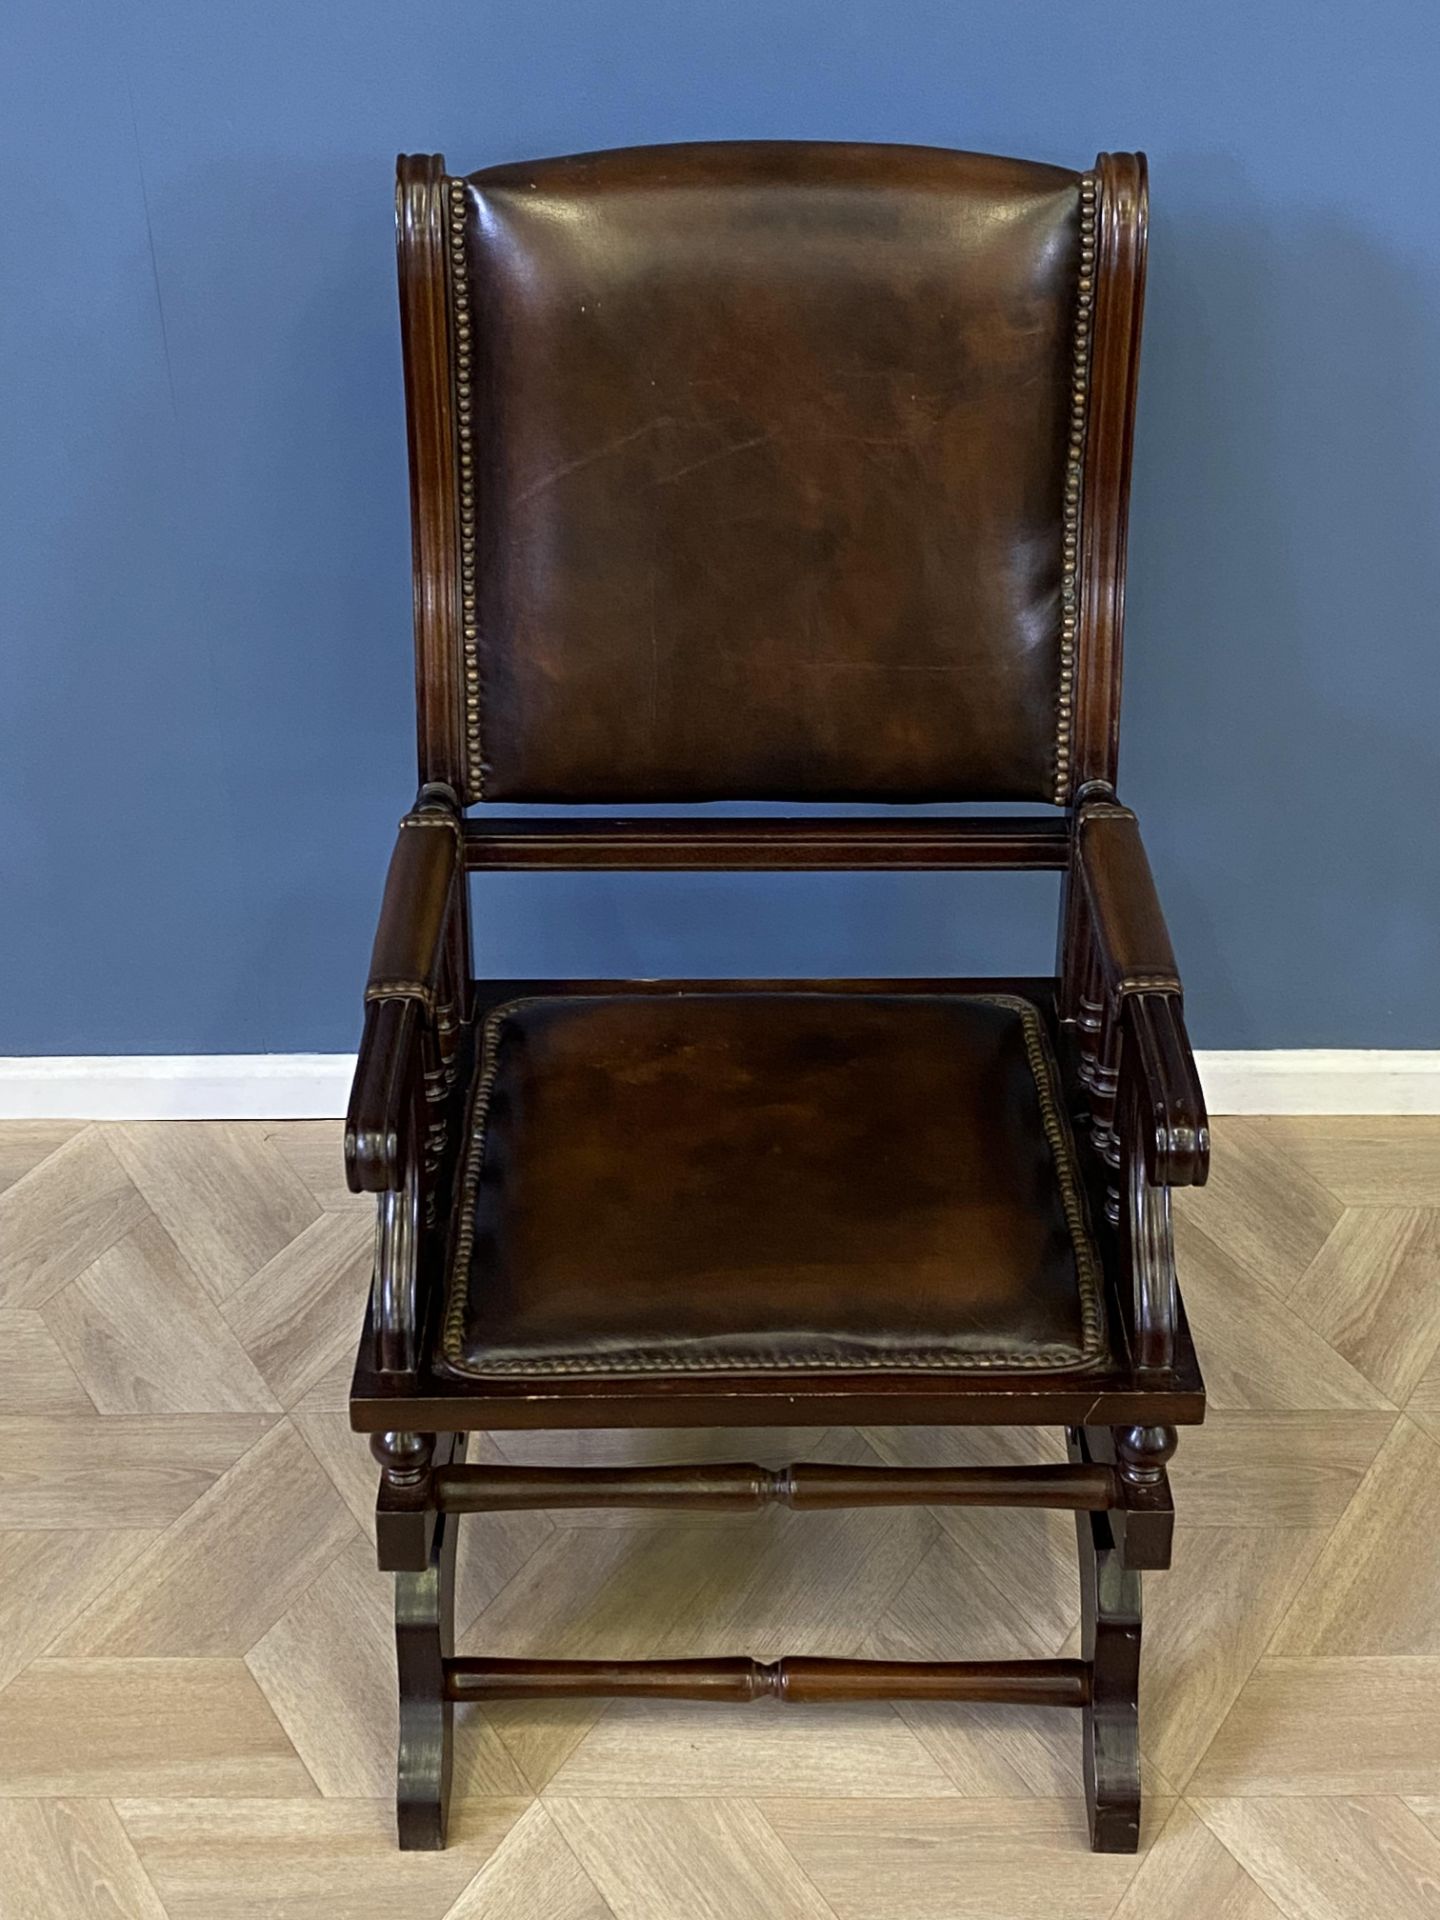 Mahogany framed leather rocking chair